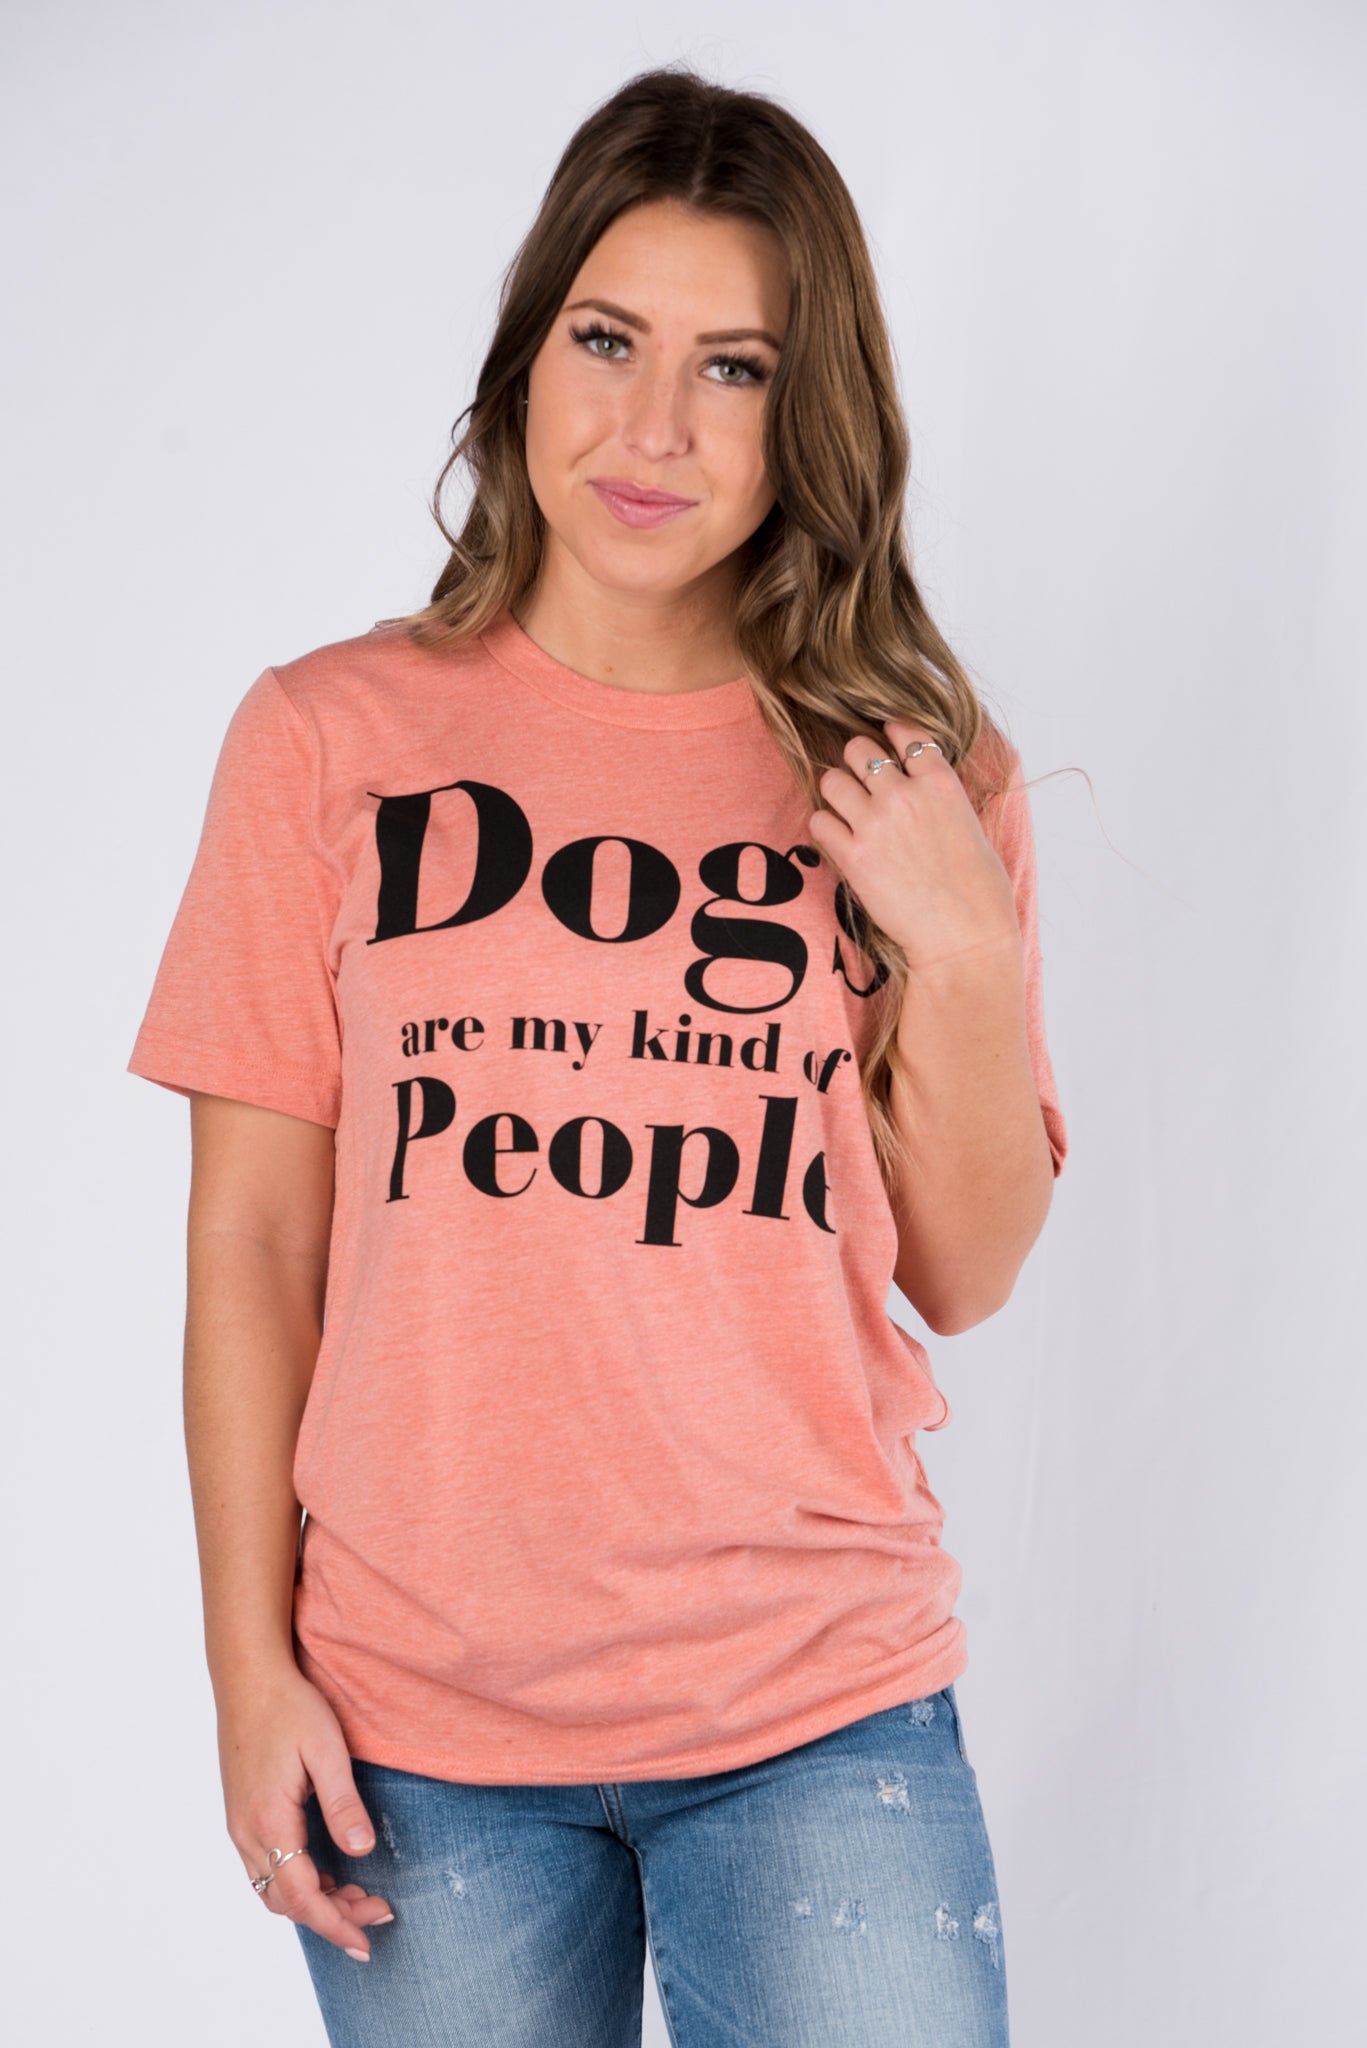 Dogs are my kind of people unisex short sleeve crew neck t-shirt sunset - Cute T-shirts - Funny T-Shirts at Lush Fashion Lounge Boutique in Oklahoma City